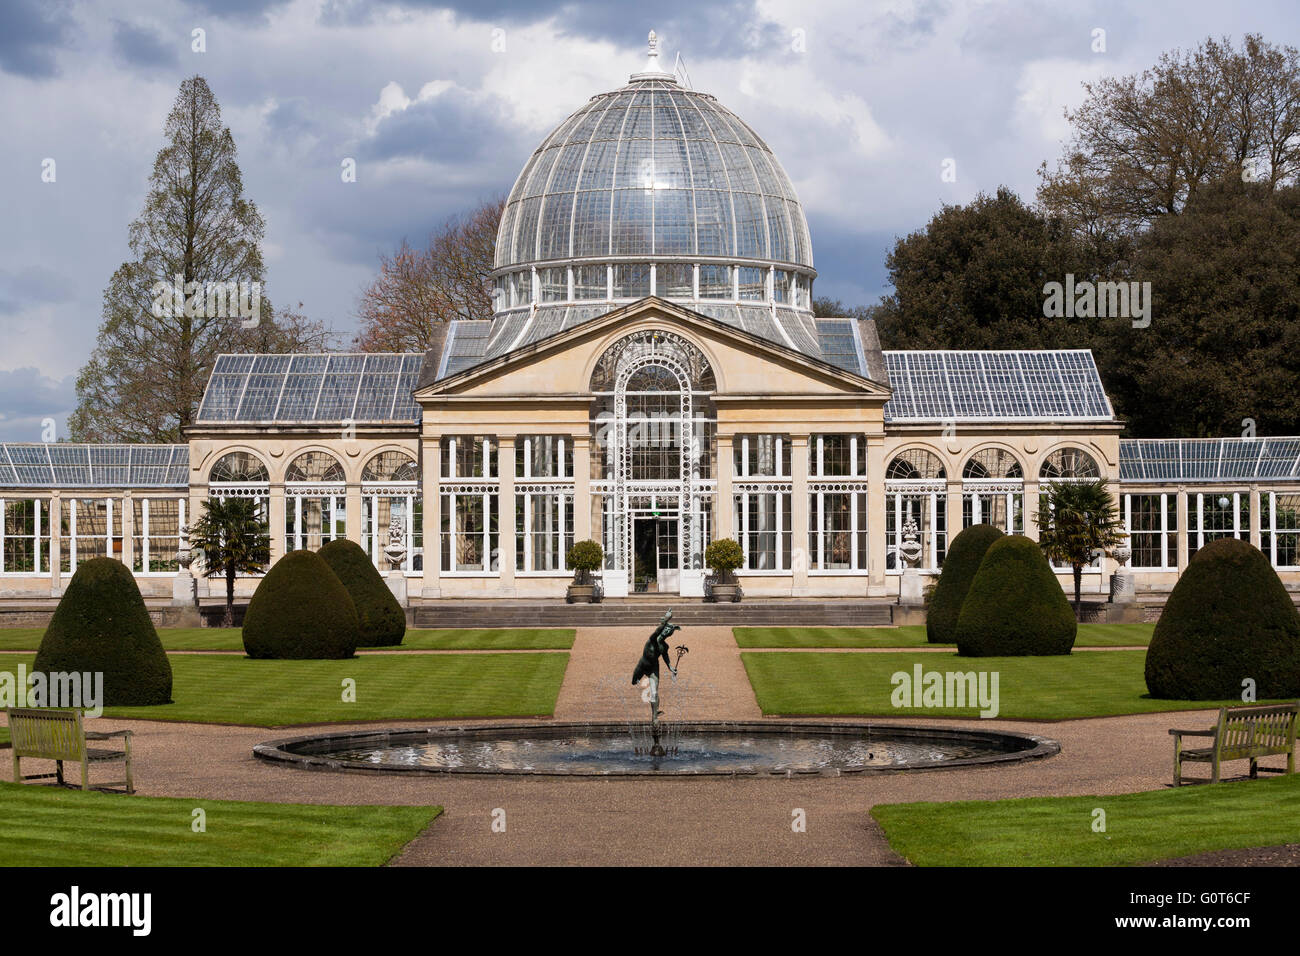 Syon House Great Conservatory with glass dome (Grade I listed building) and statue of winged Mercury and formal garden pond. UK Stock Photo